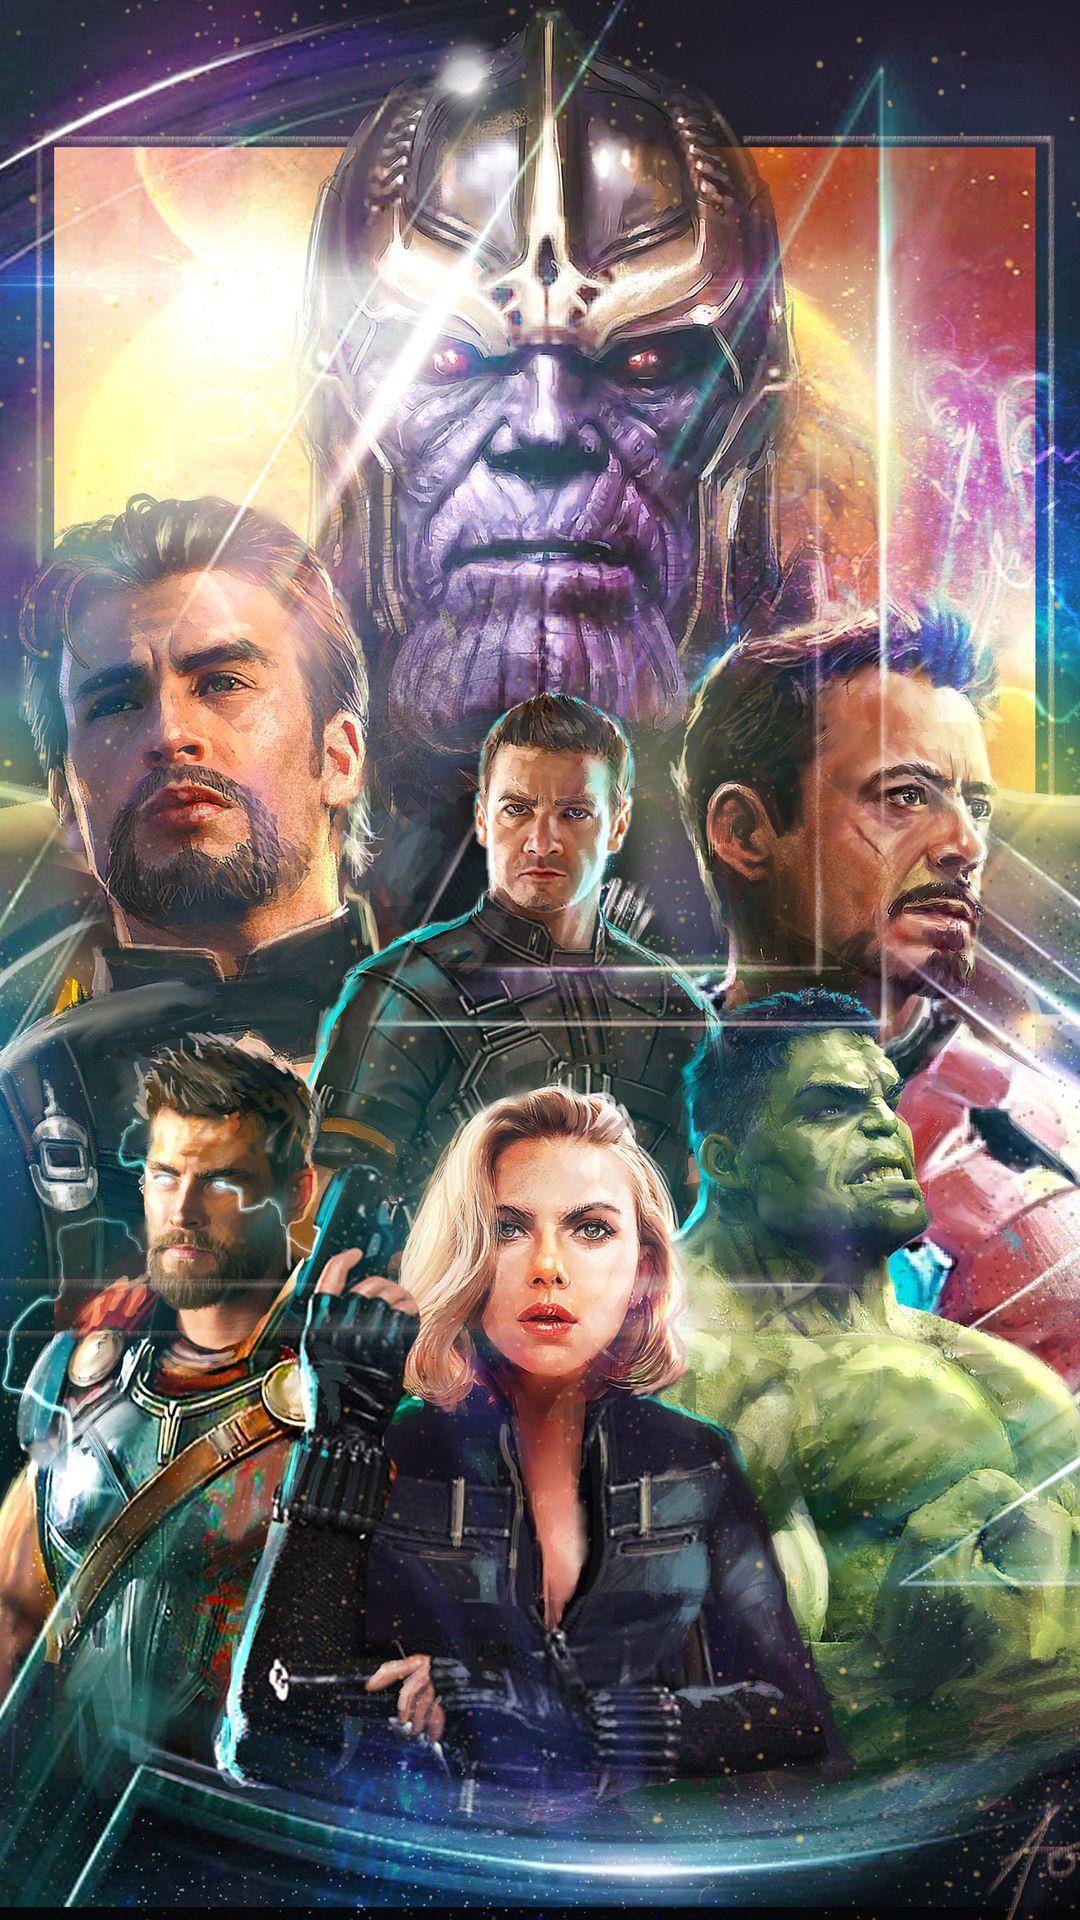 Avengers Infinity War 4k wallpaper for iPhone and Android